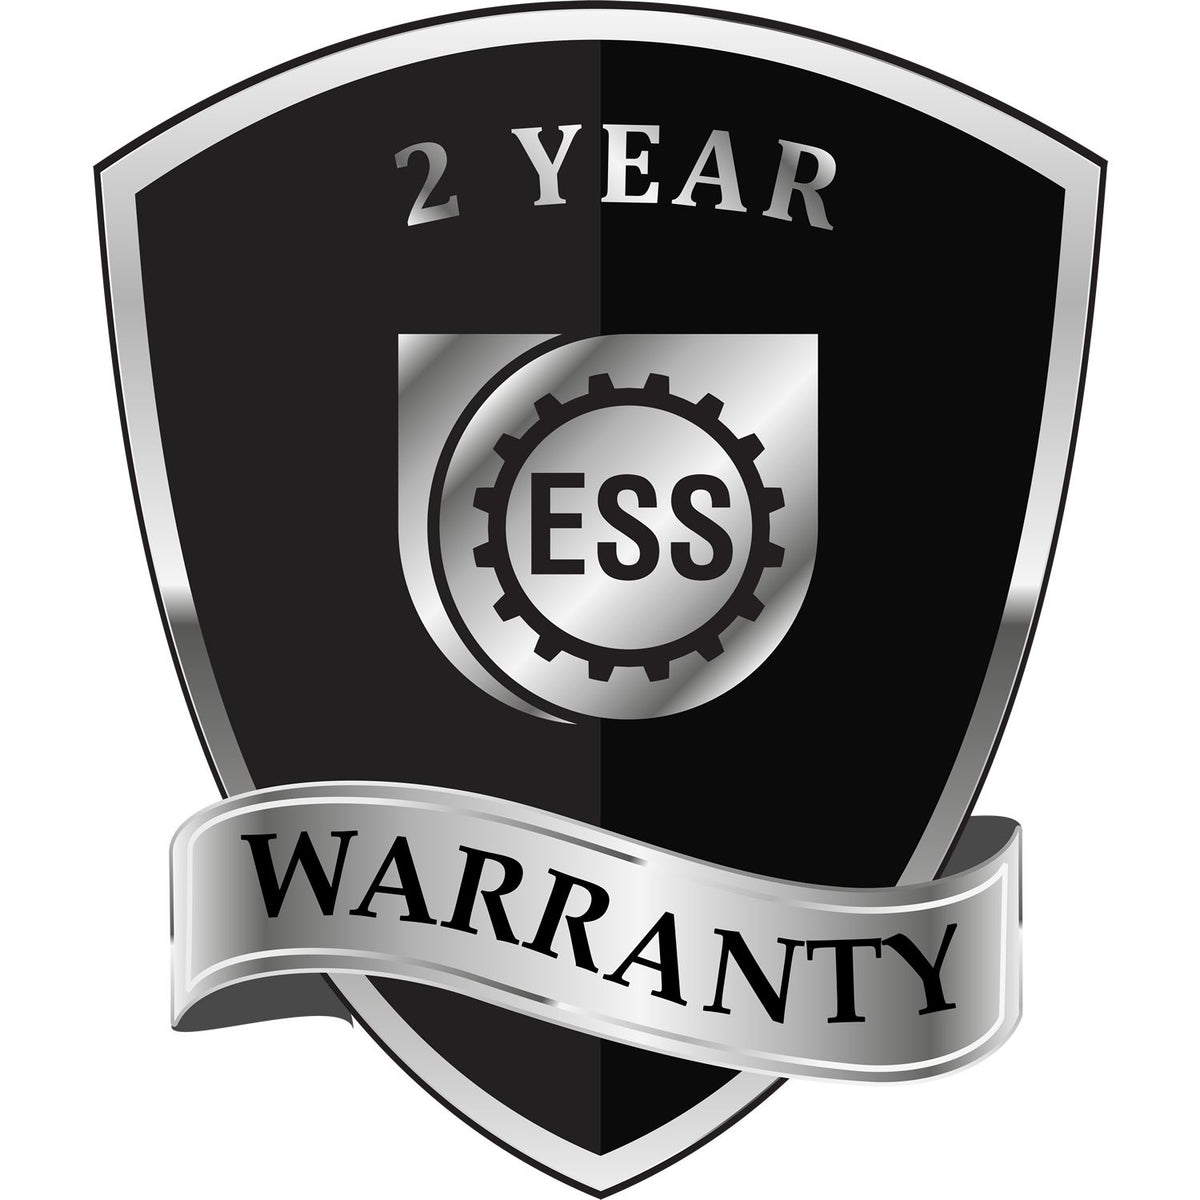 A black and silver badge or emblem showing warranty information for the Soft South Carolina Professional Geologist Seal